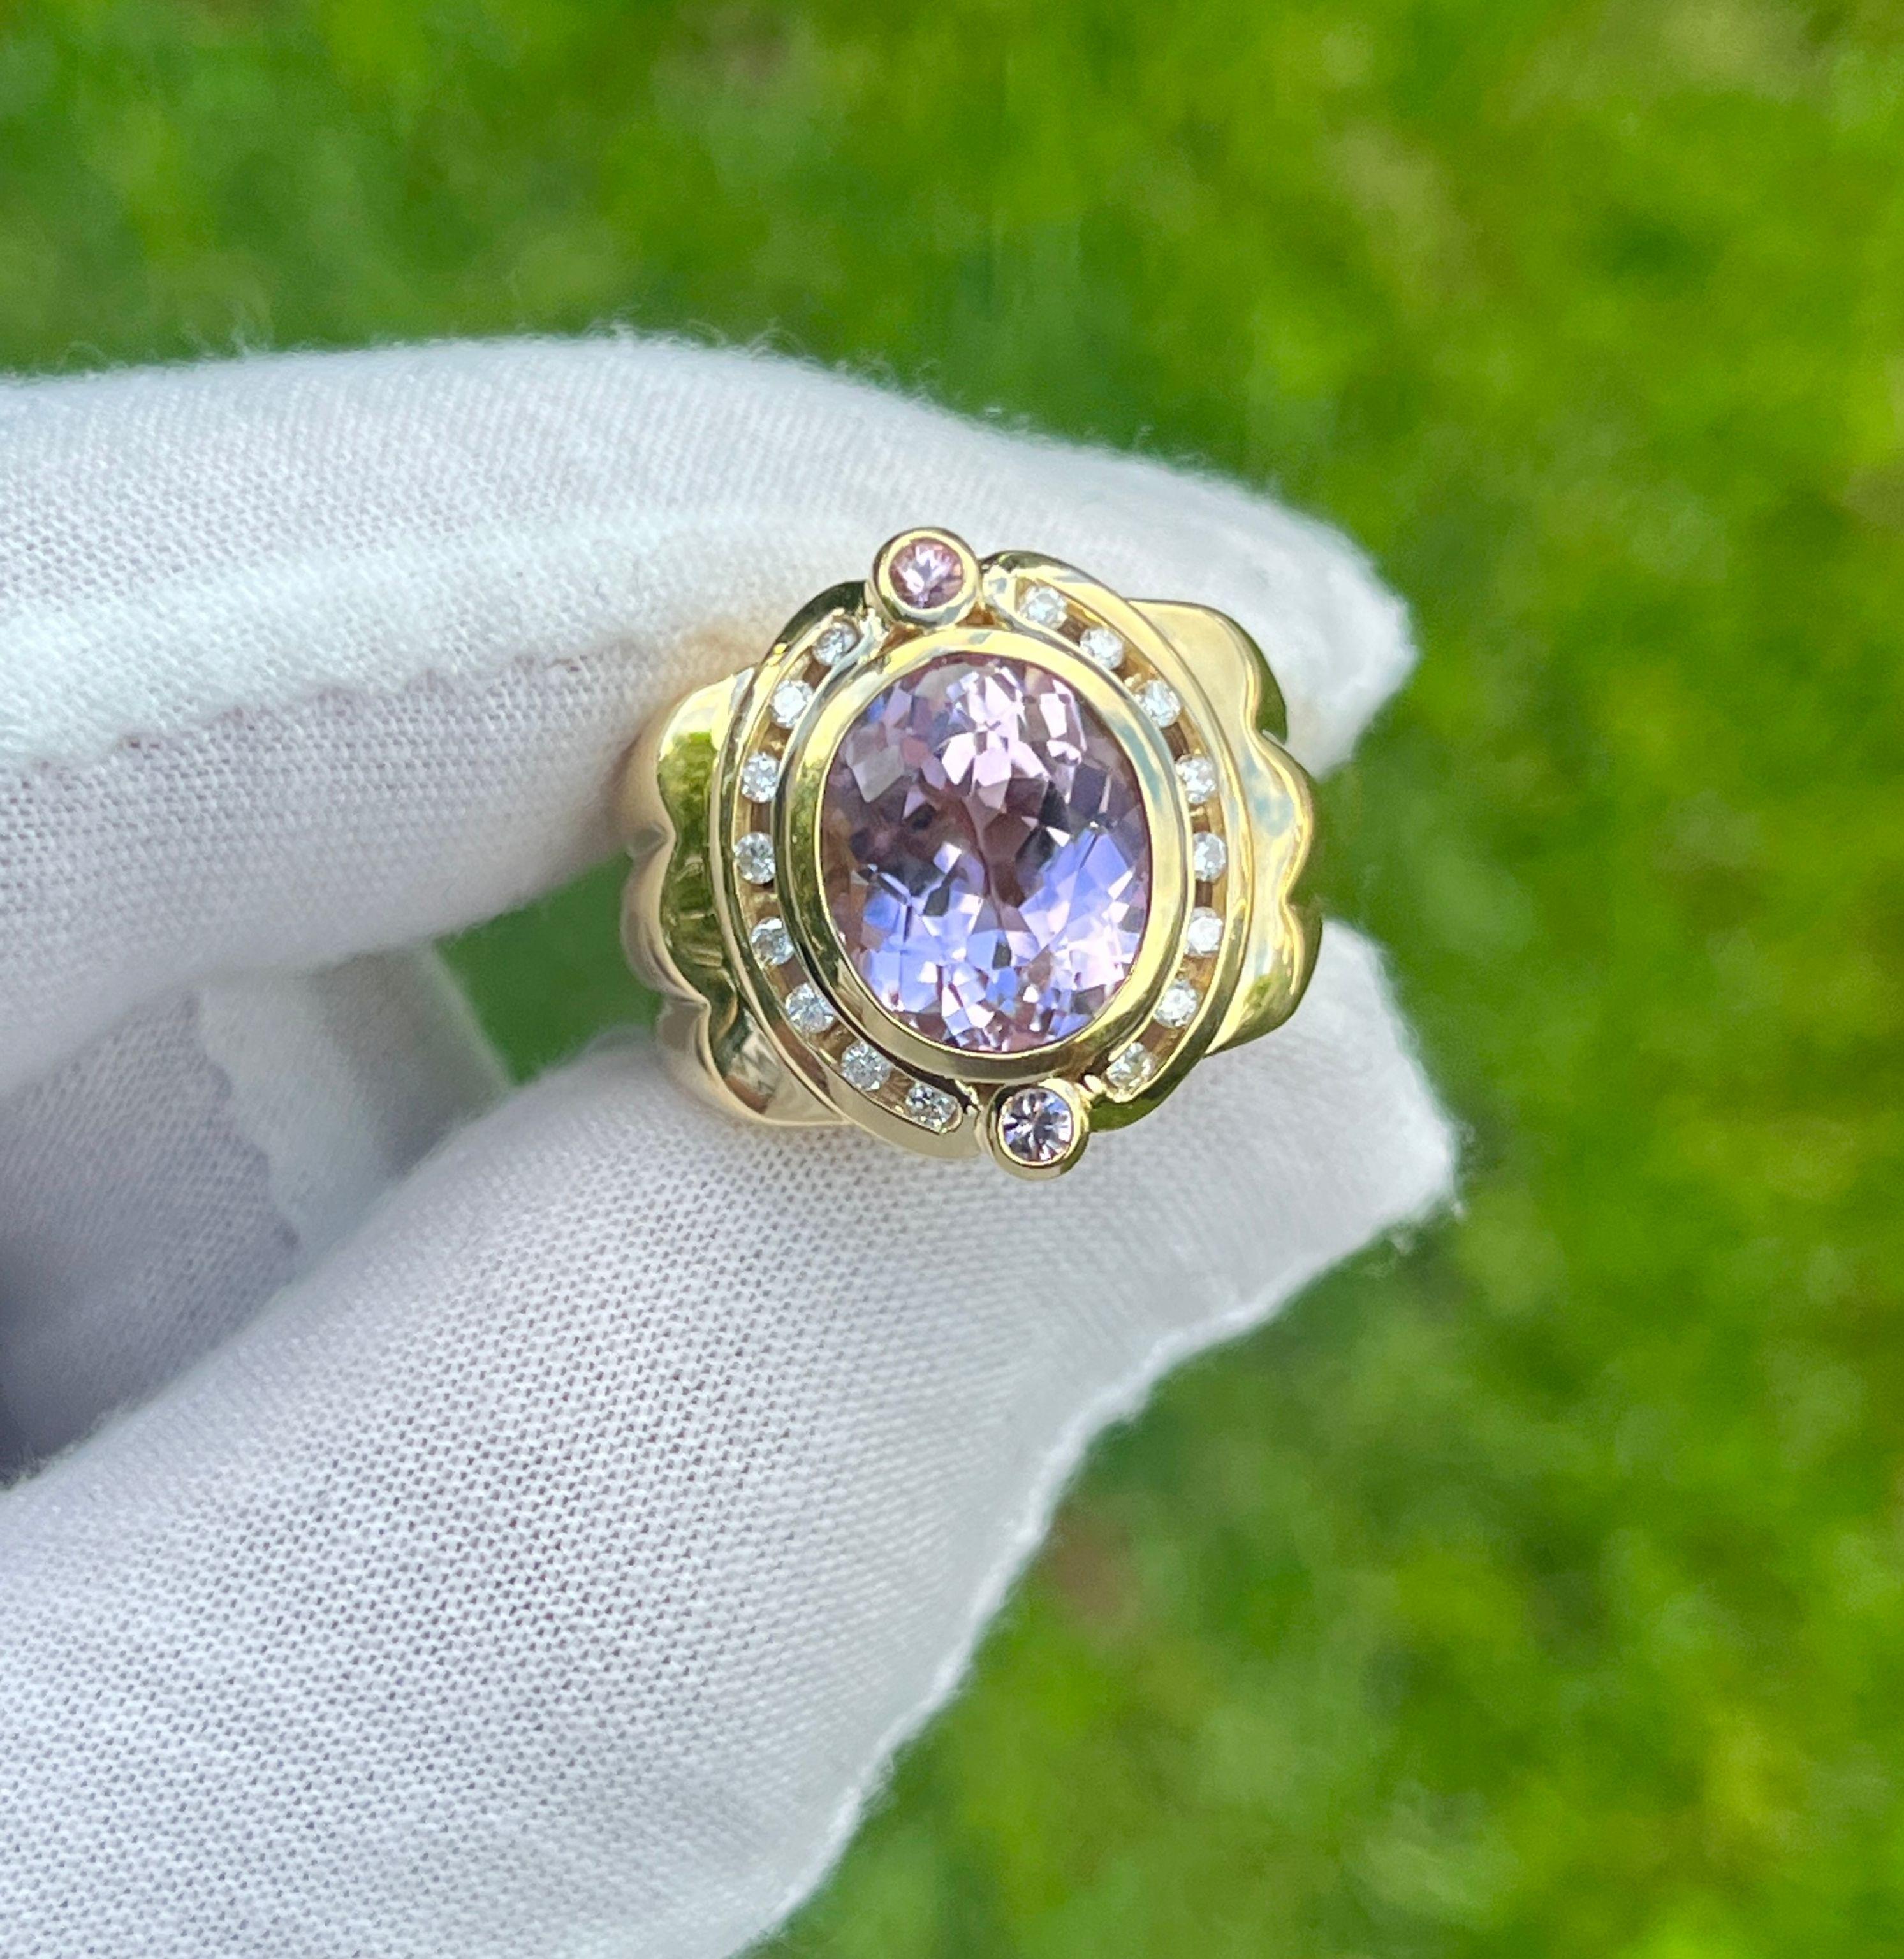 Women's 18K Gold Vintage Retro Regal Ring With Pink Kunzite and Diamond Halo For Sale